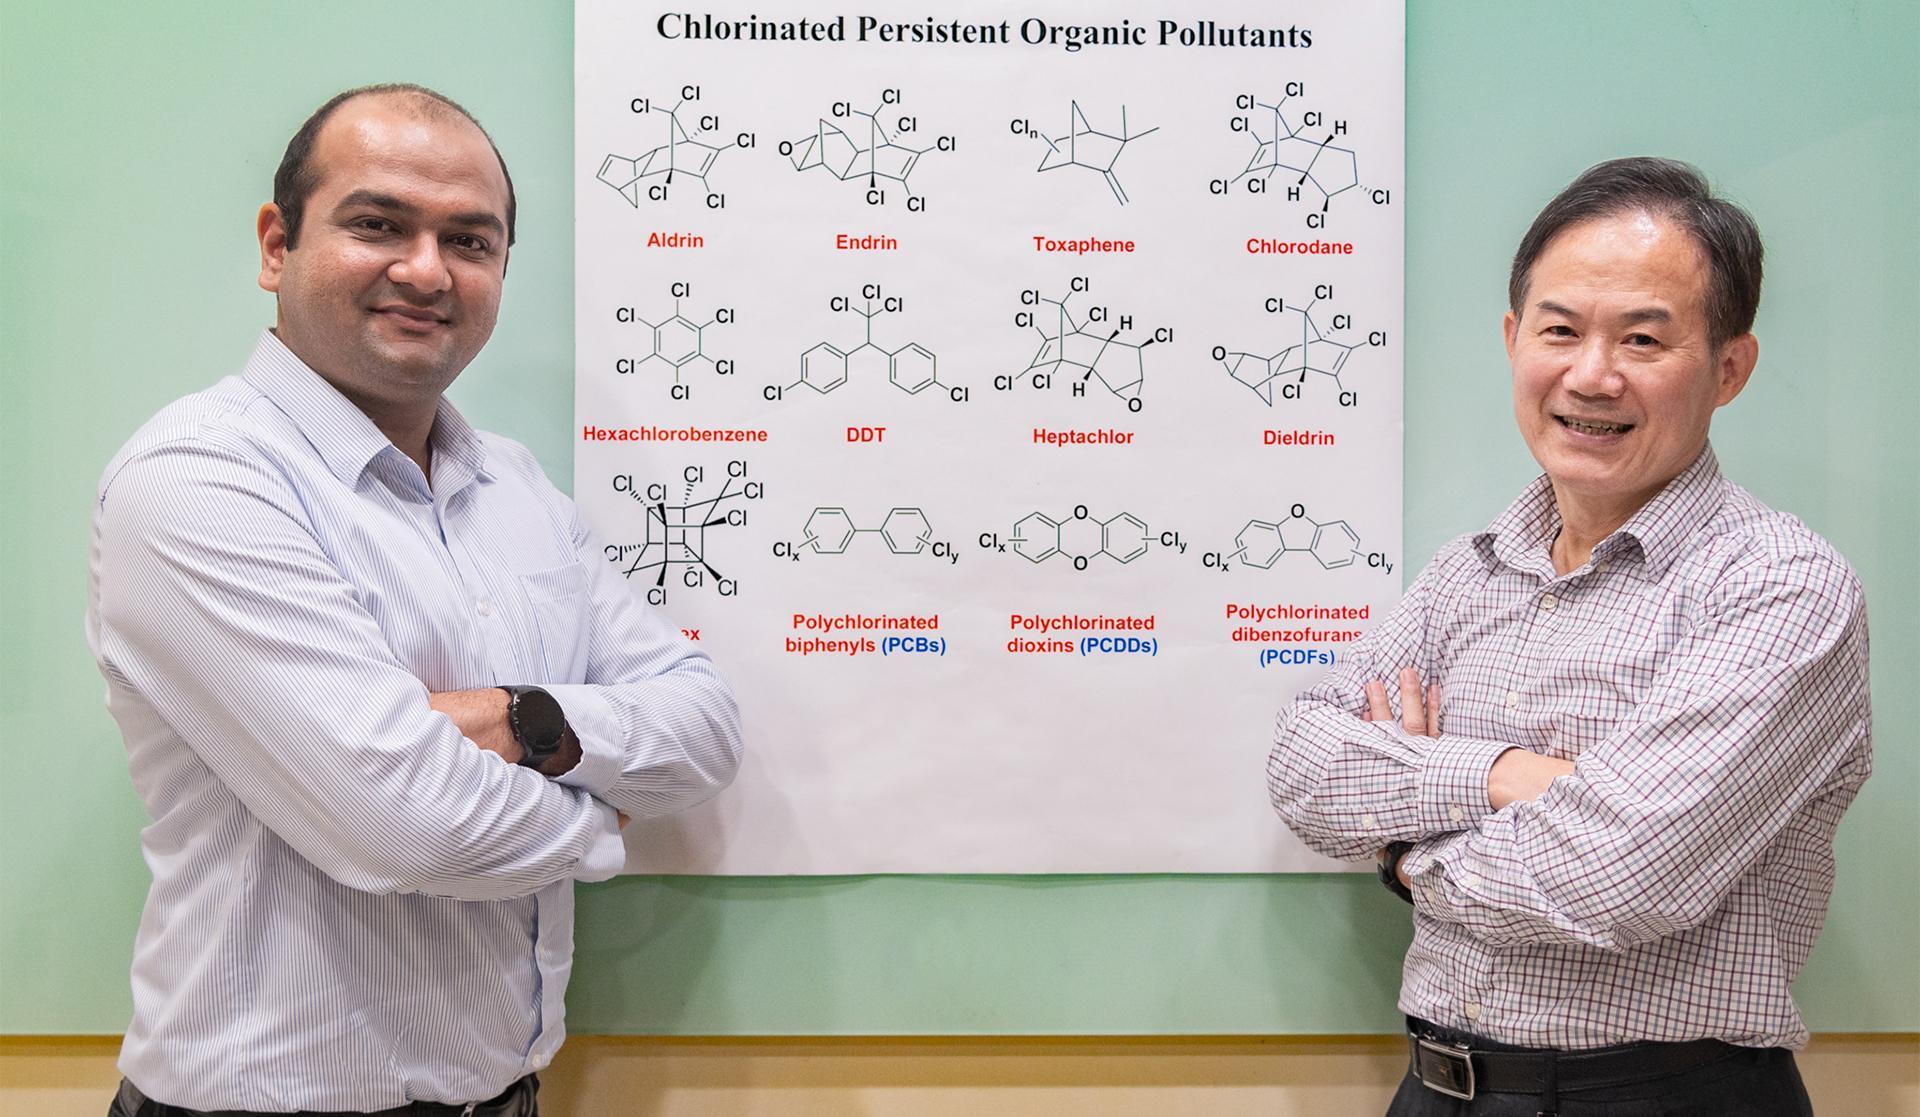 NTHU Distinguished professor Kuo Chu Hwang (黃國柱) (right) and postdoctoral researcher Vaibhav Pramod Charpe have developed a method to successfully decompose persistent organic pollutants (POPs) such as dioxins.